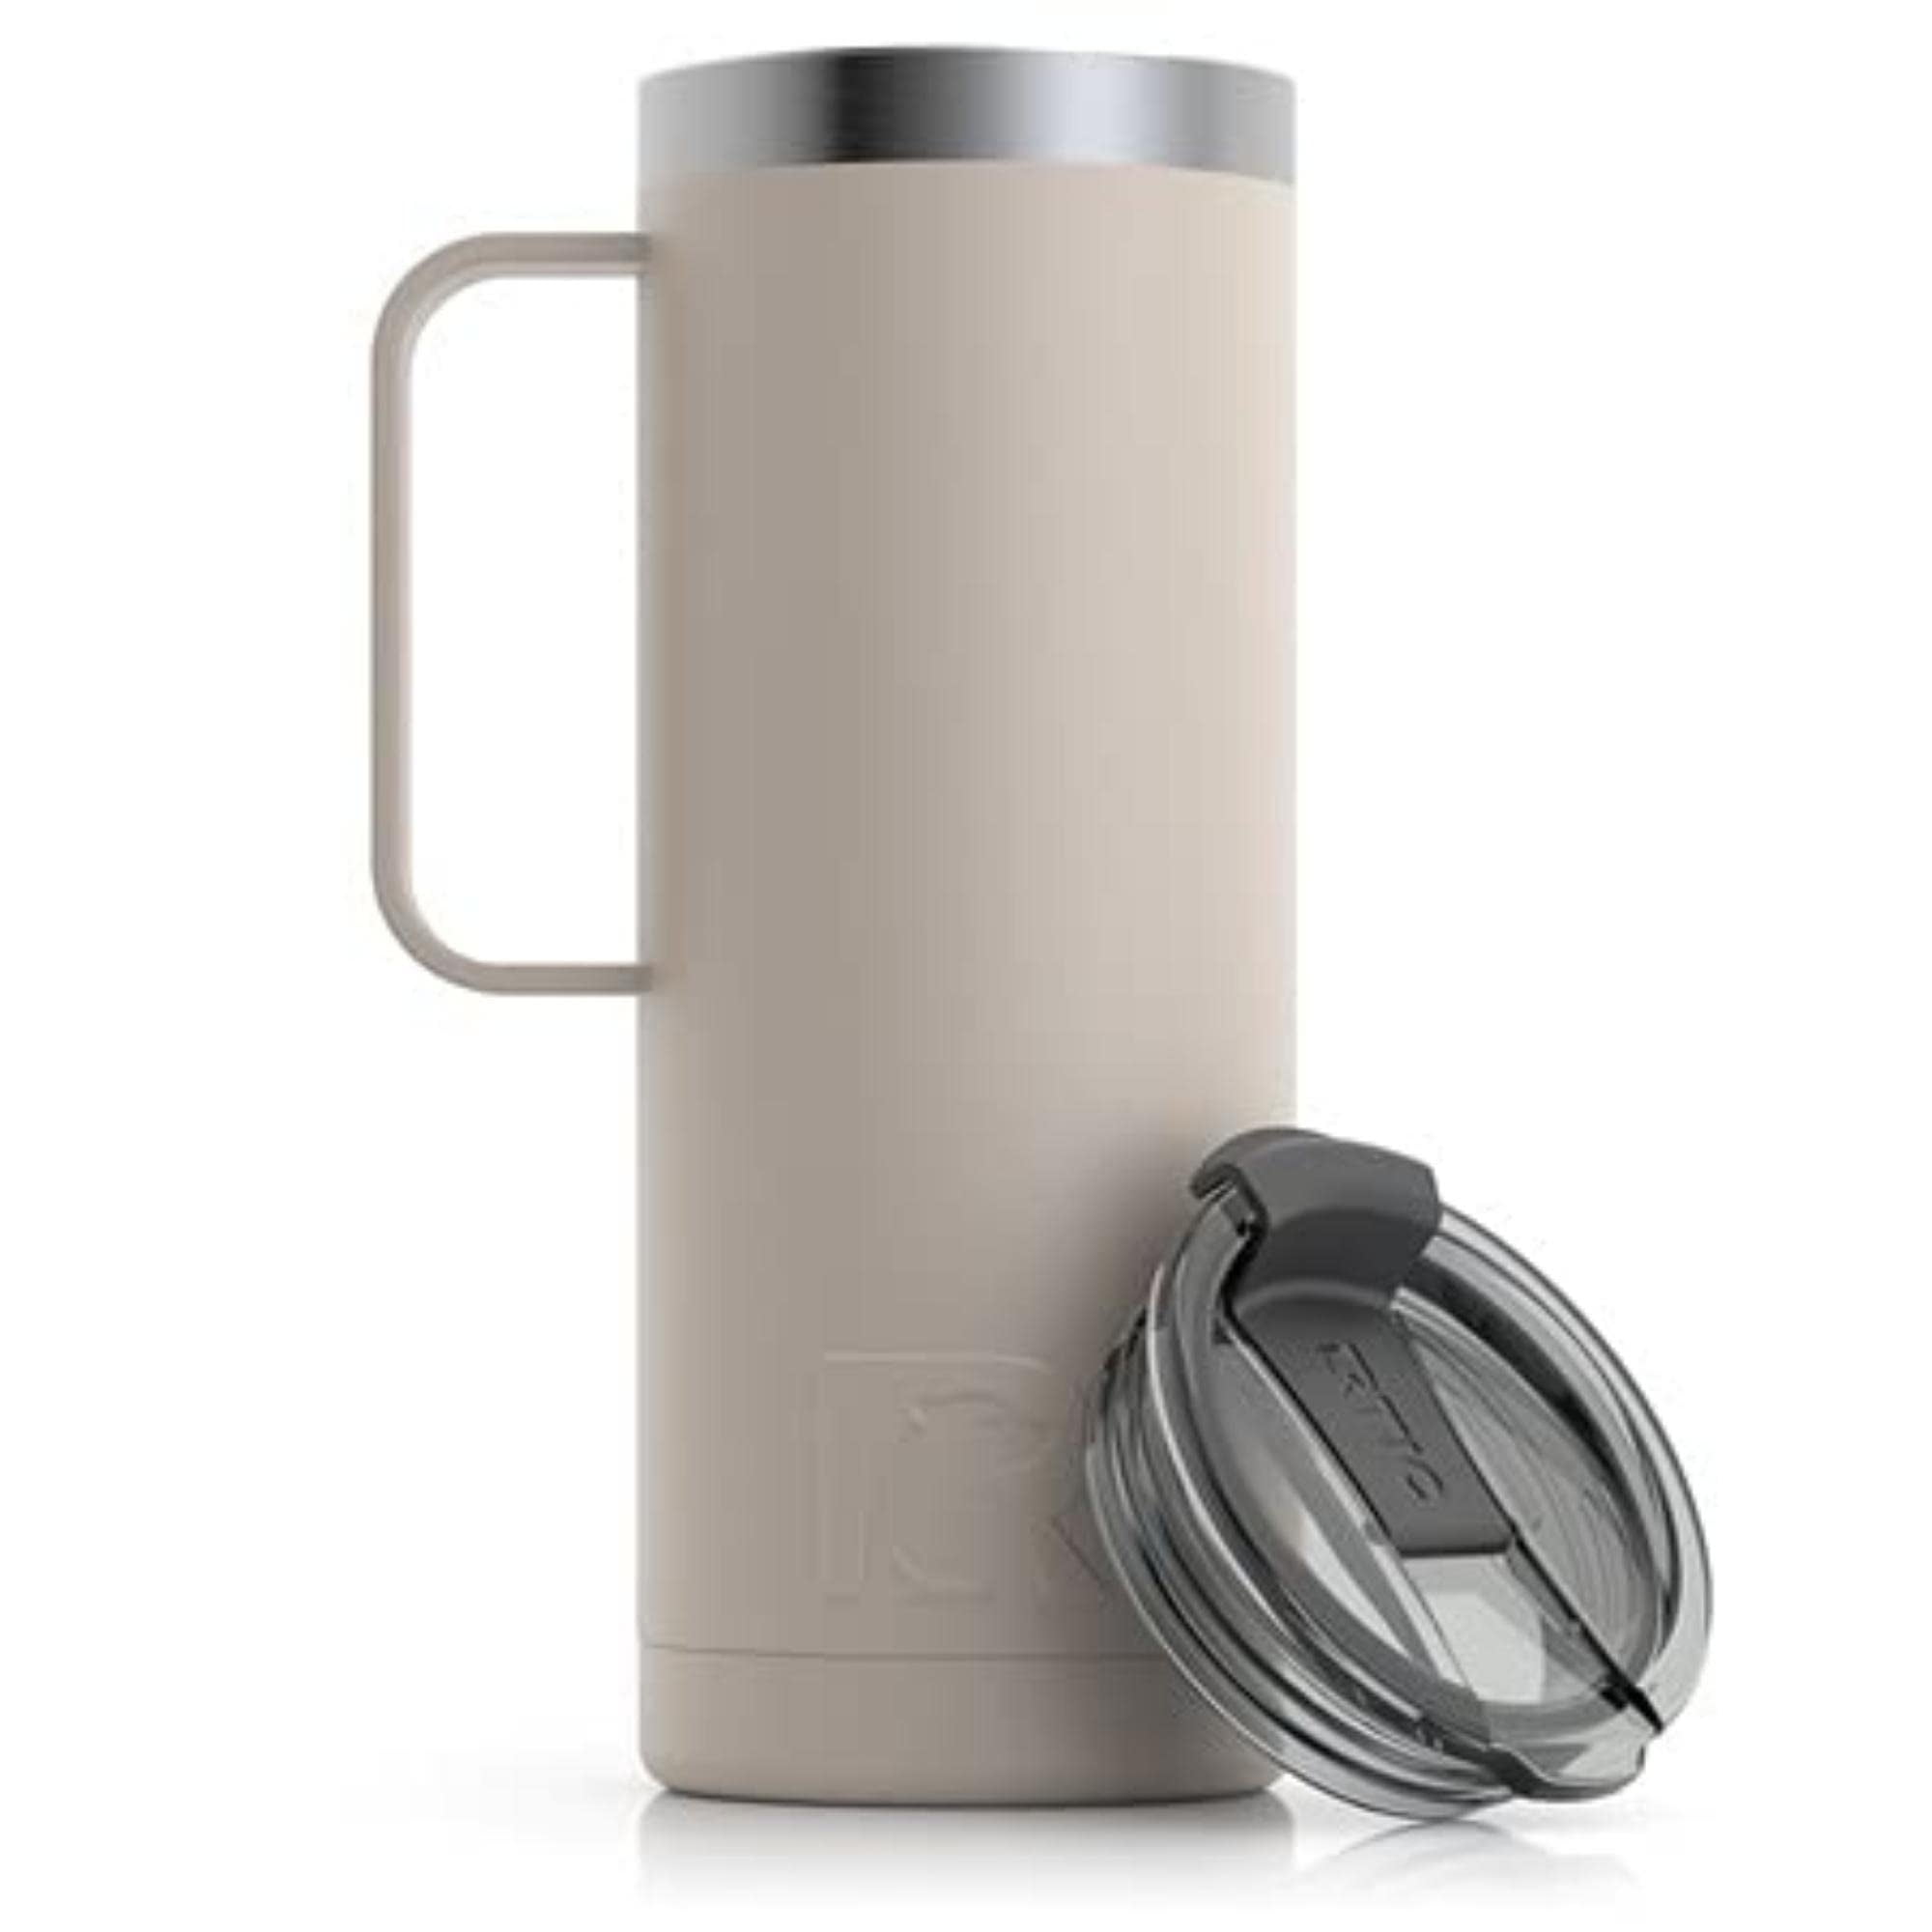  CafePress But First Coffee Travel Mug Stainless Steel Travel Mug,  Insulated 20 oz. Coffee Tumbler : Home & Kitchen